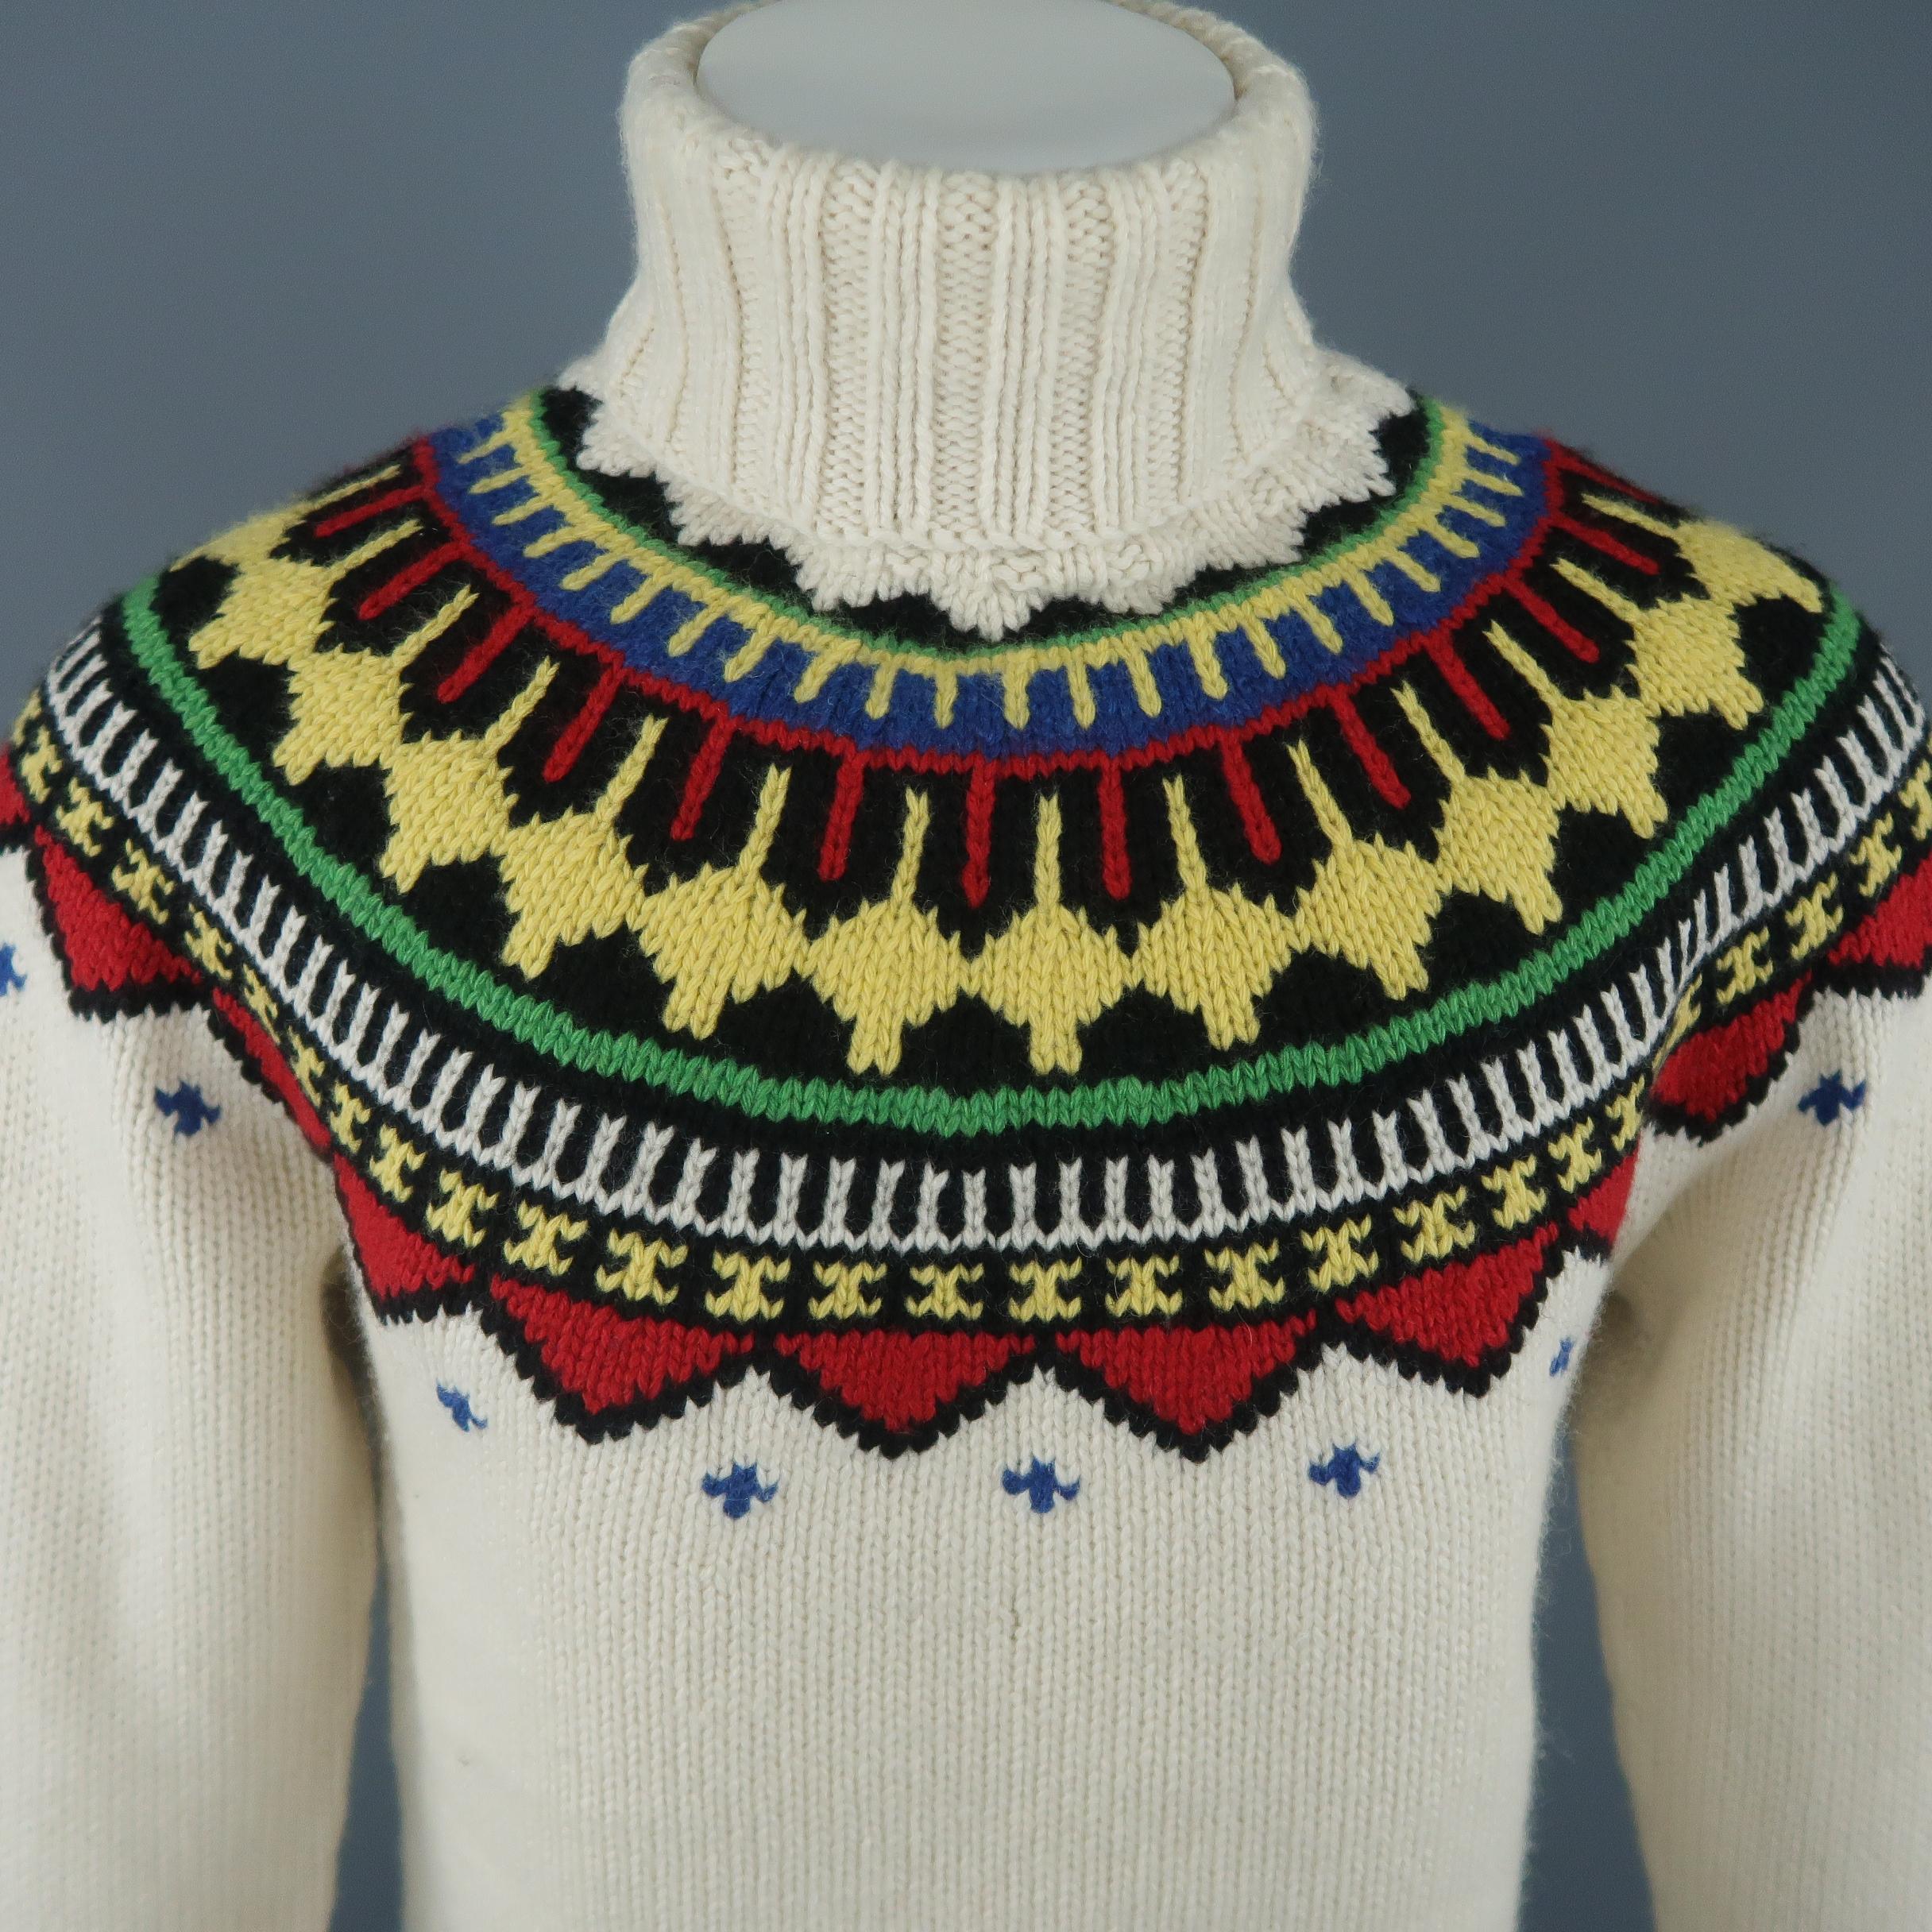 POLO RALPH LAUREN turtleneck sweater comes in cream wool knit with a rolled turtleneck collar and multi color Intarsia Fairisle print.
 
Excellent Pre-Owned Condition.
Marked: M
 
Measurements:
 
Shoulder: 20 in.
Chest: 44 in.
Sleeve: 25 in.
Length: